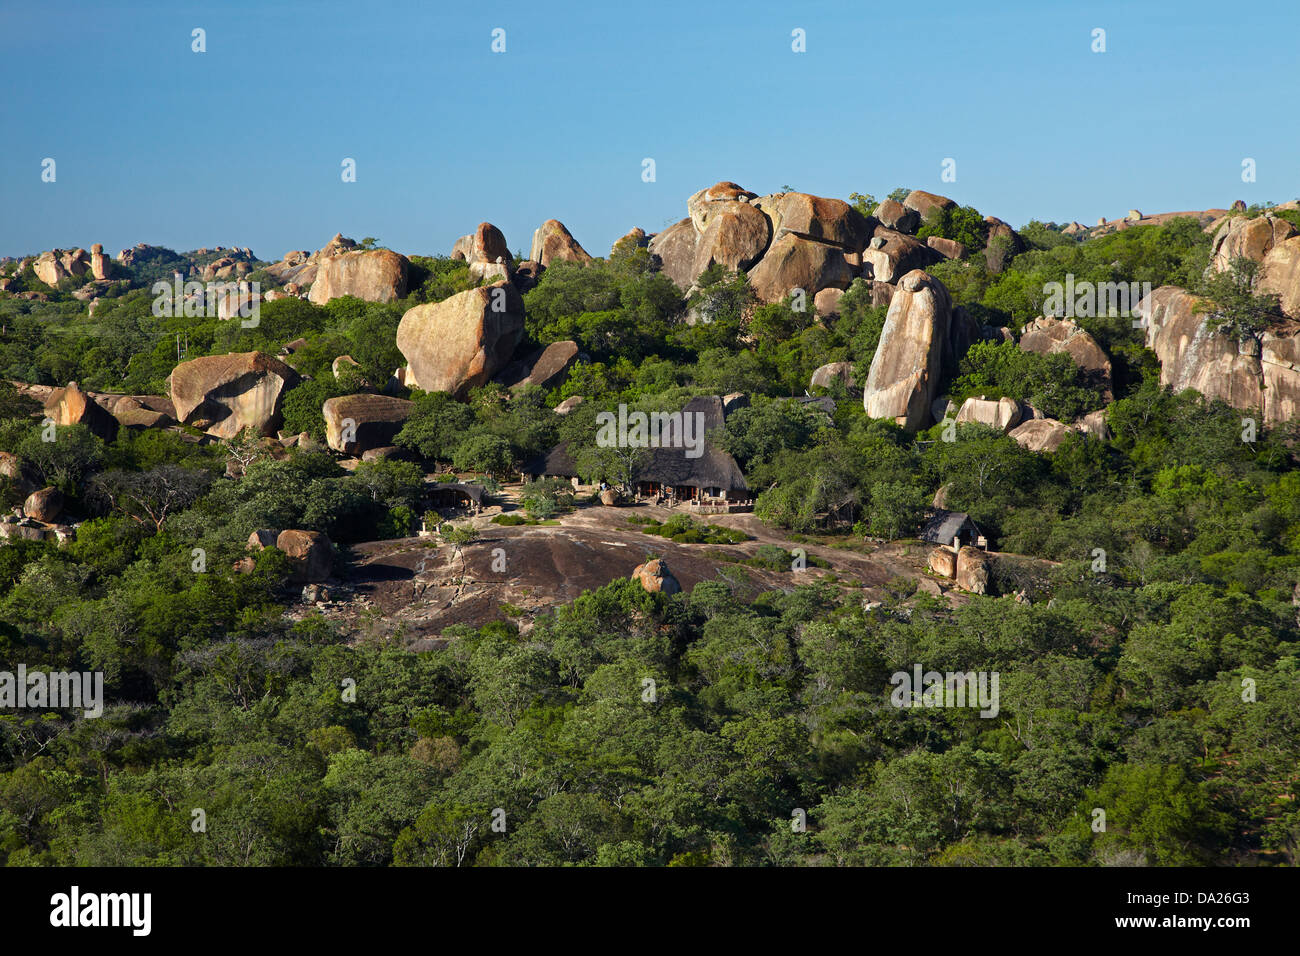 Big Cave Camp, blending in to the granite outcrops of the Matopos Hills, near Bulawayo, Zimbabwe, Southern Africa Stock Photo